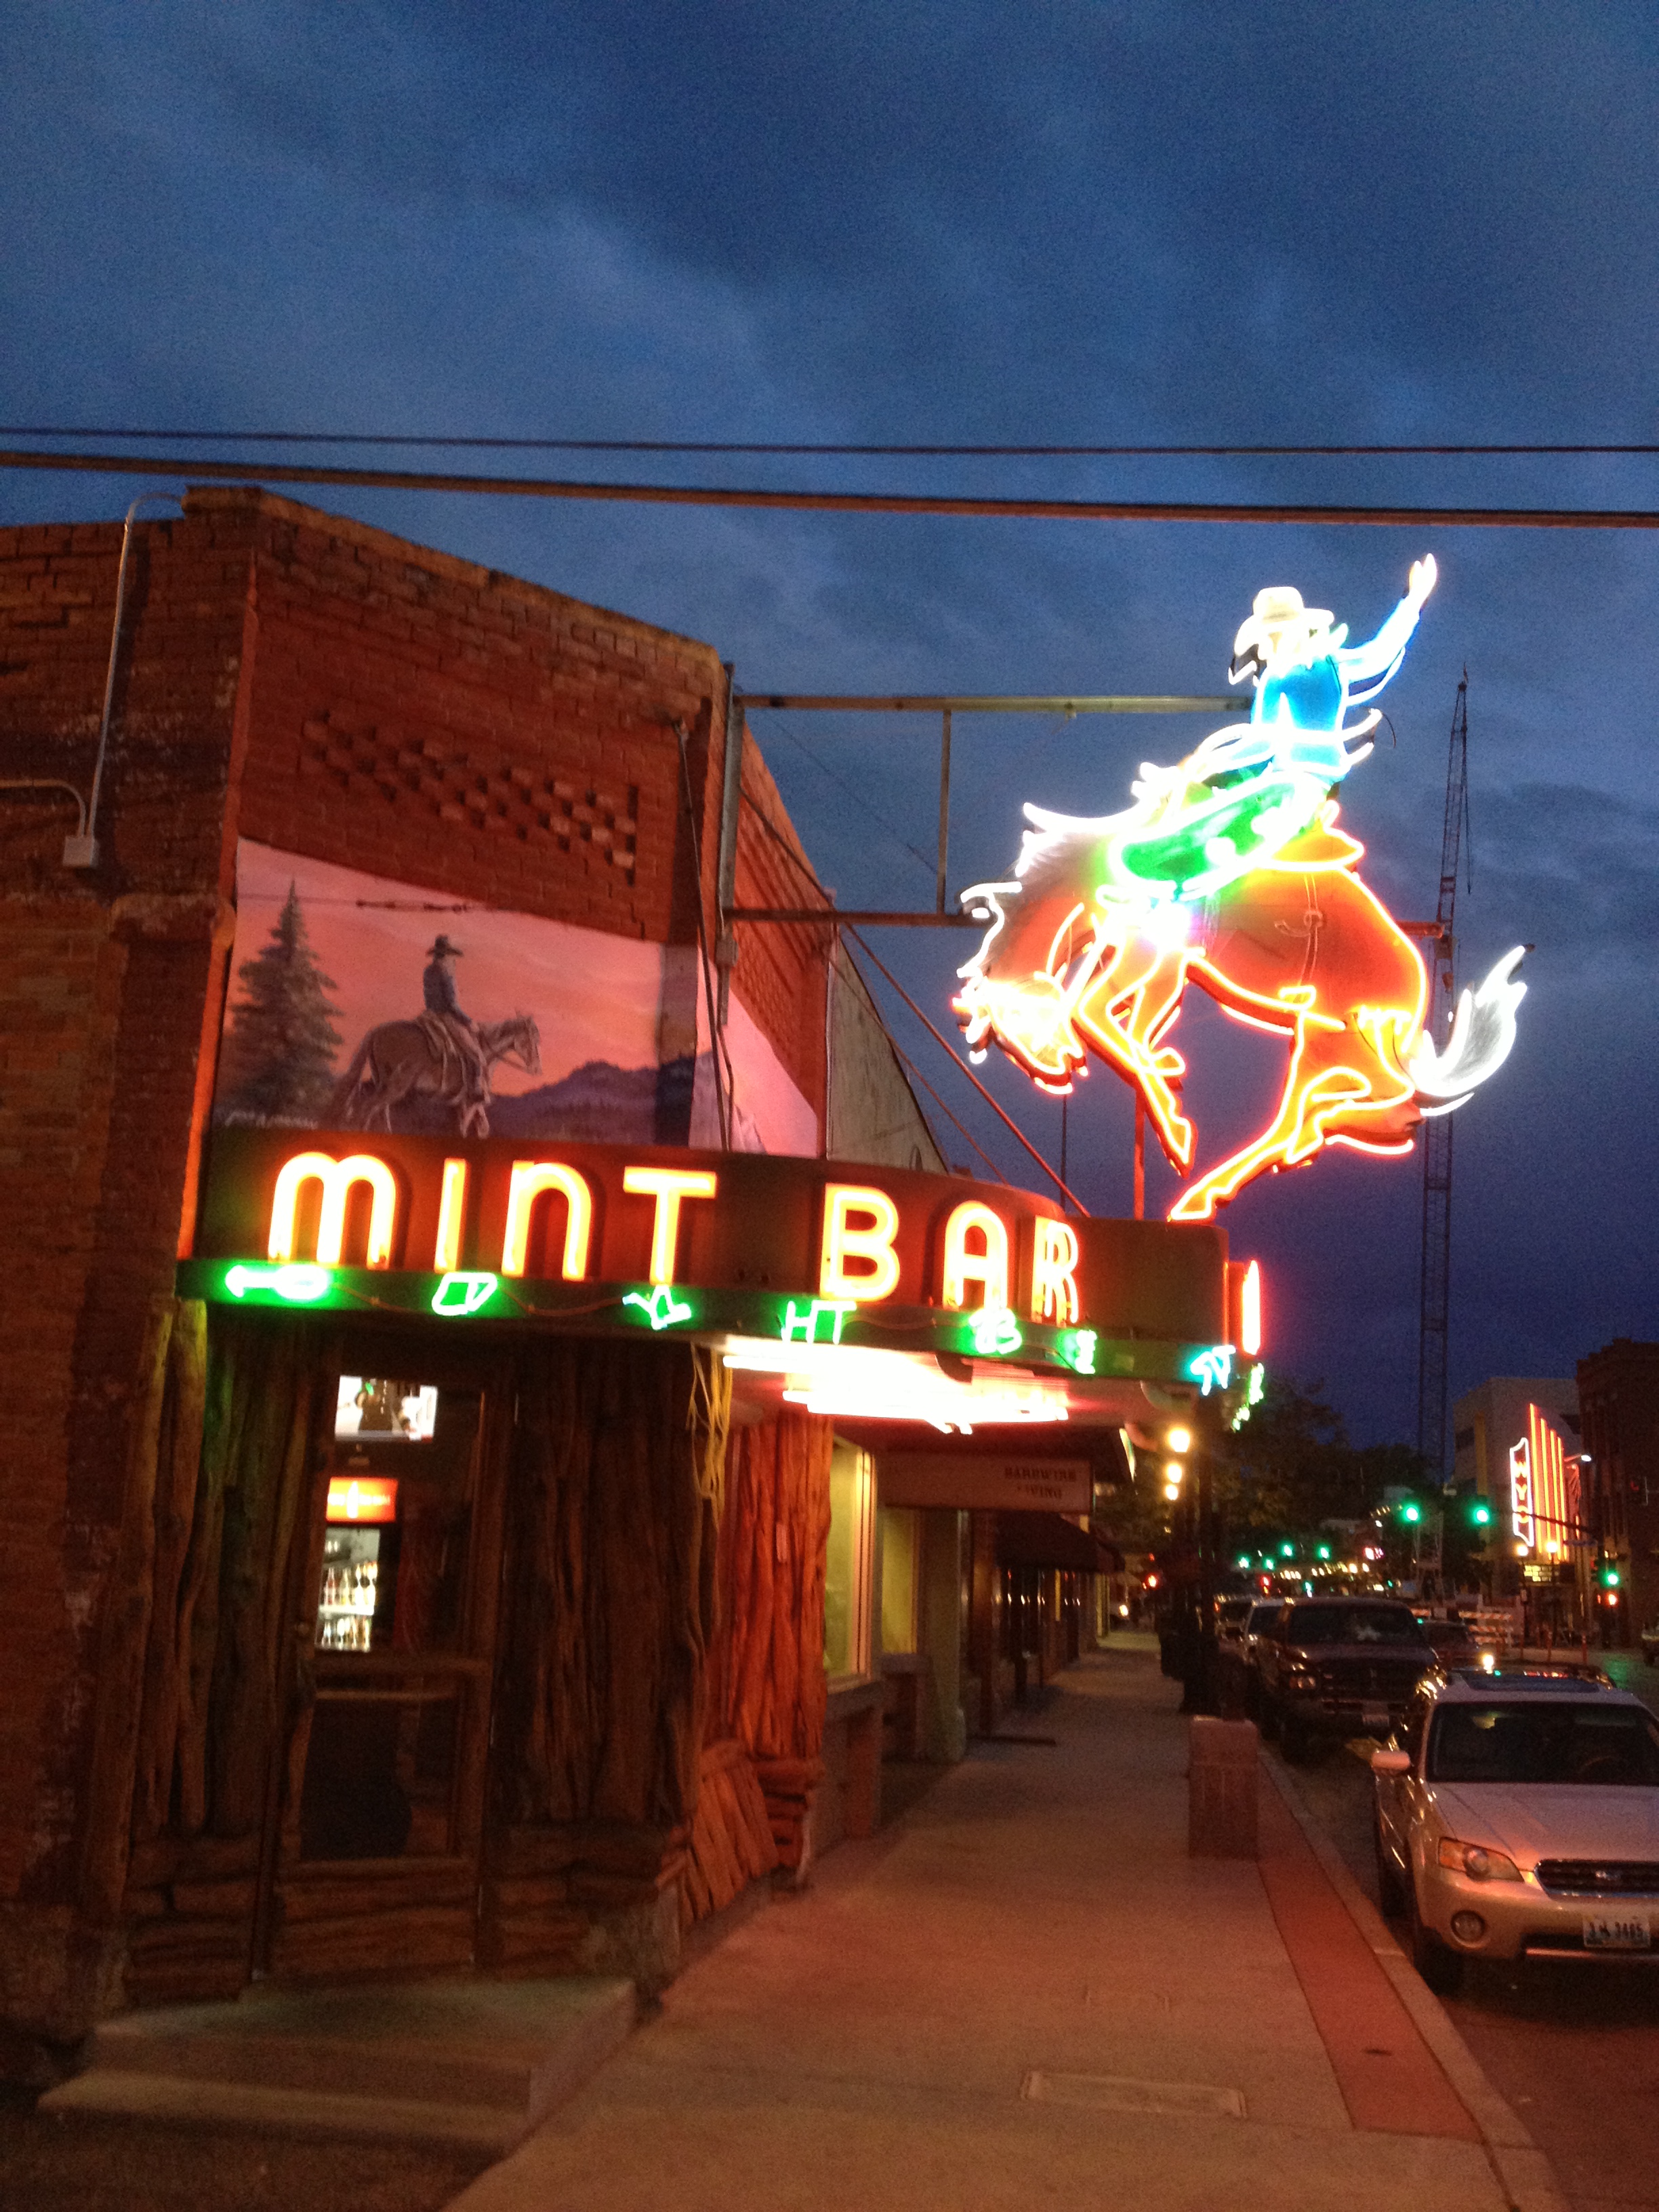 Mint Bar Sheridan Wyoming...Rumor has it Kurt is barred from ever entering this place. :)